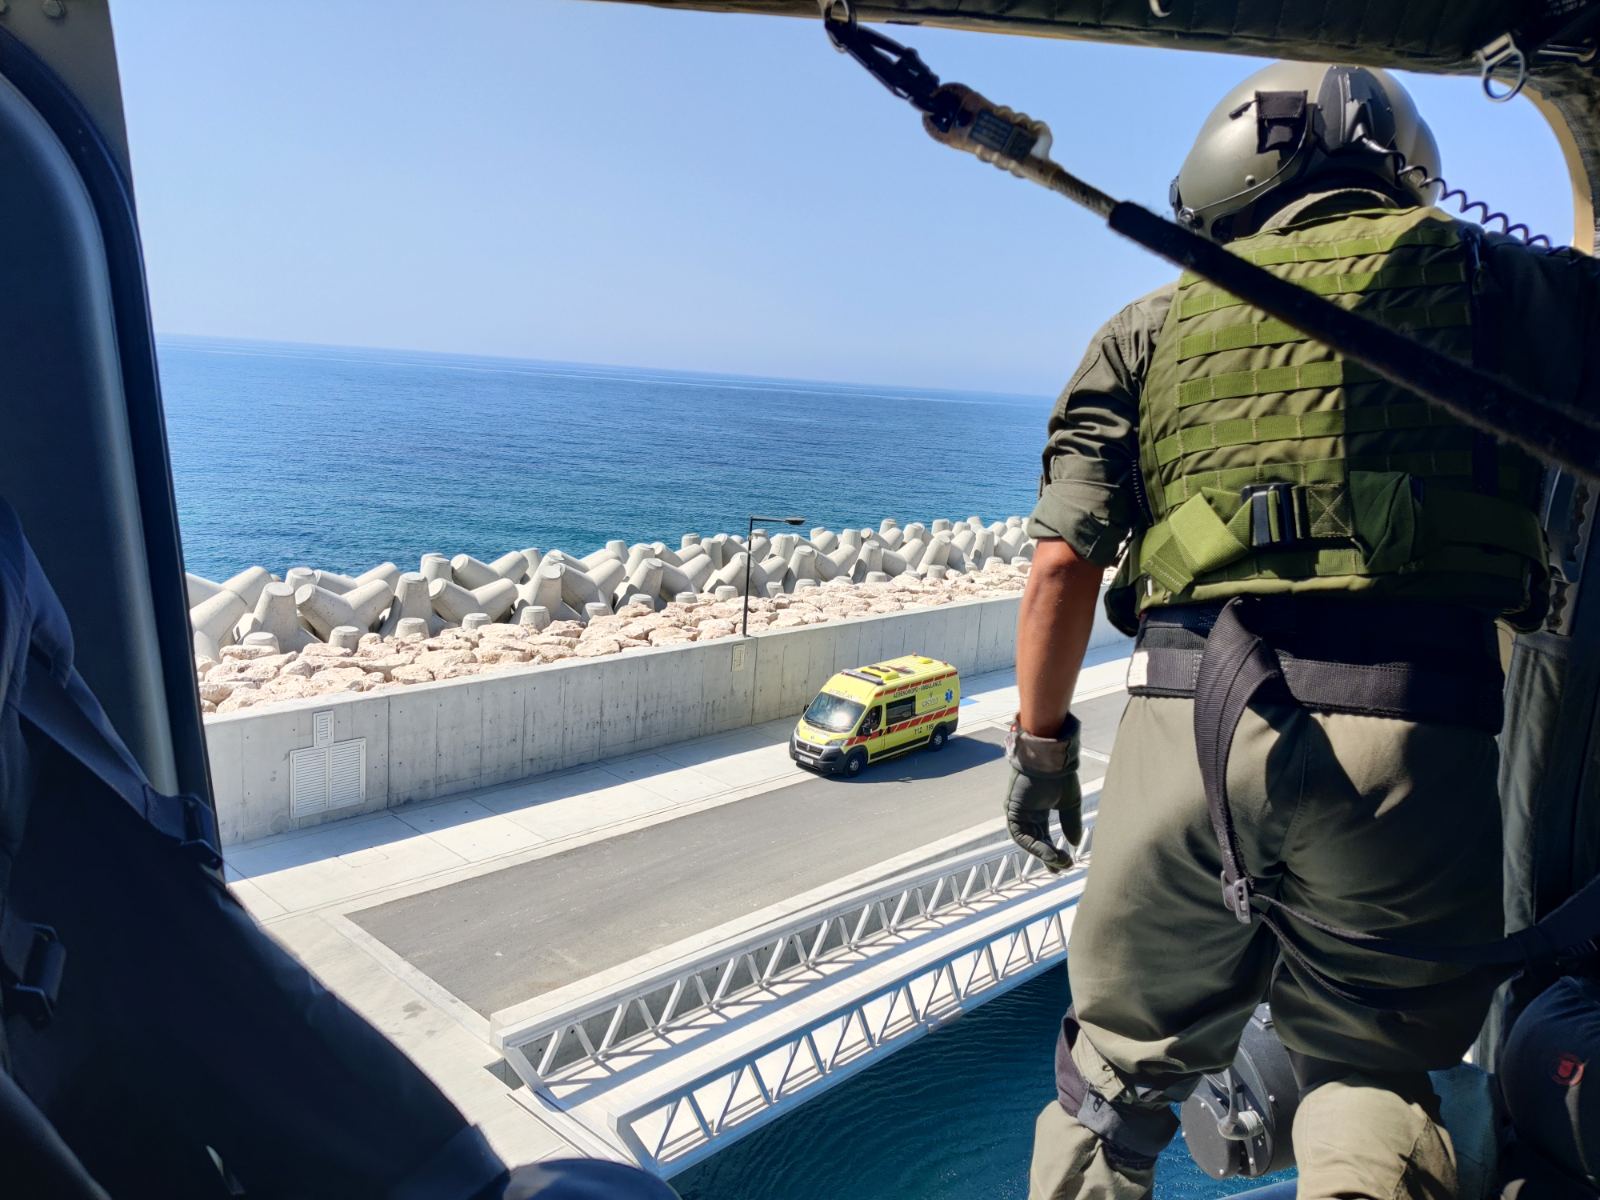 Execution of familiarization flights at the Ayia Napa Marina Heliport by Helicopters of the RoC SAR System